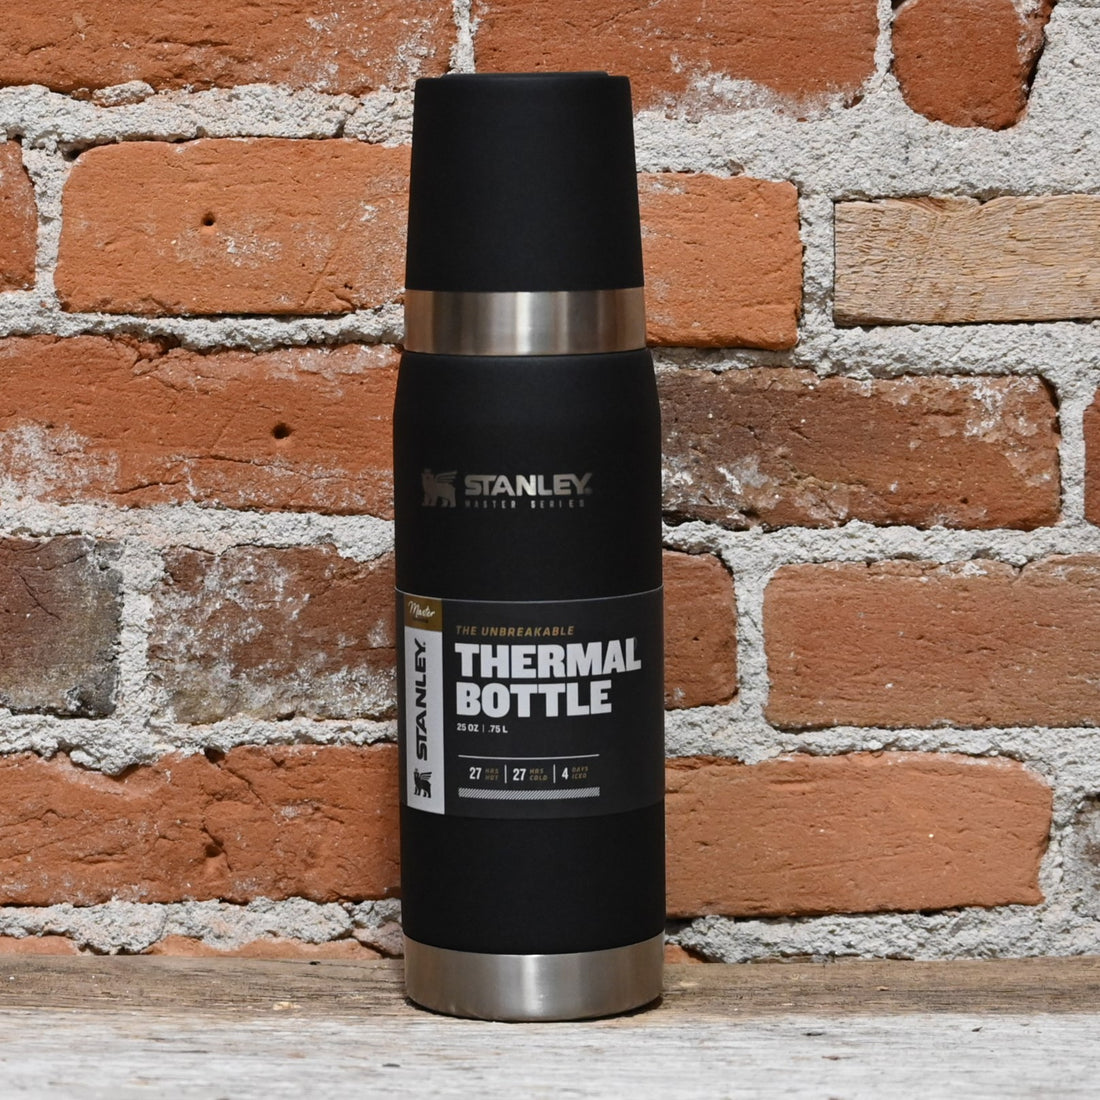 Stanley Unbreakable Thermal Bottle in Foundry Black view of stanley